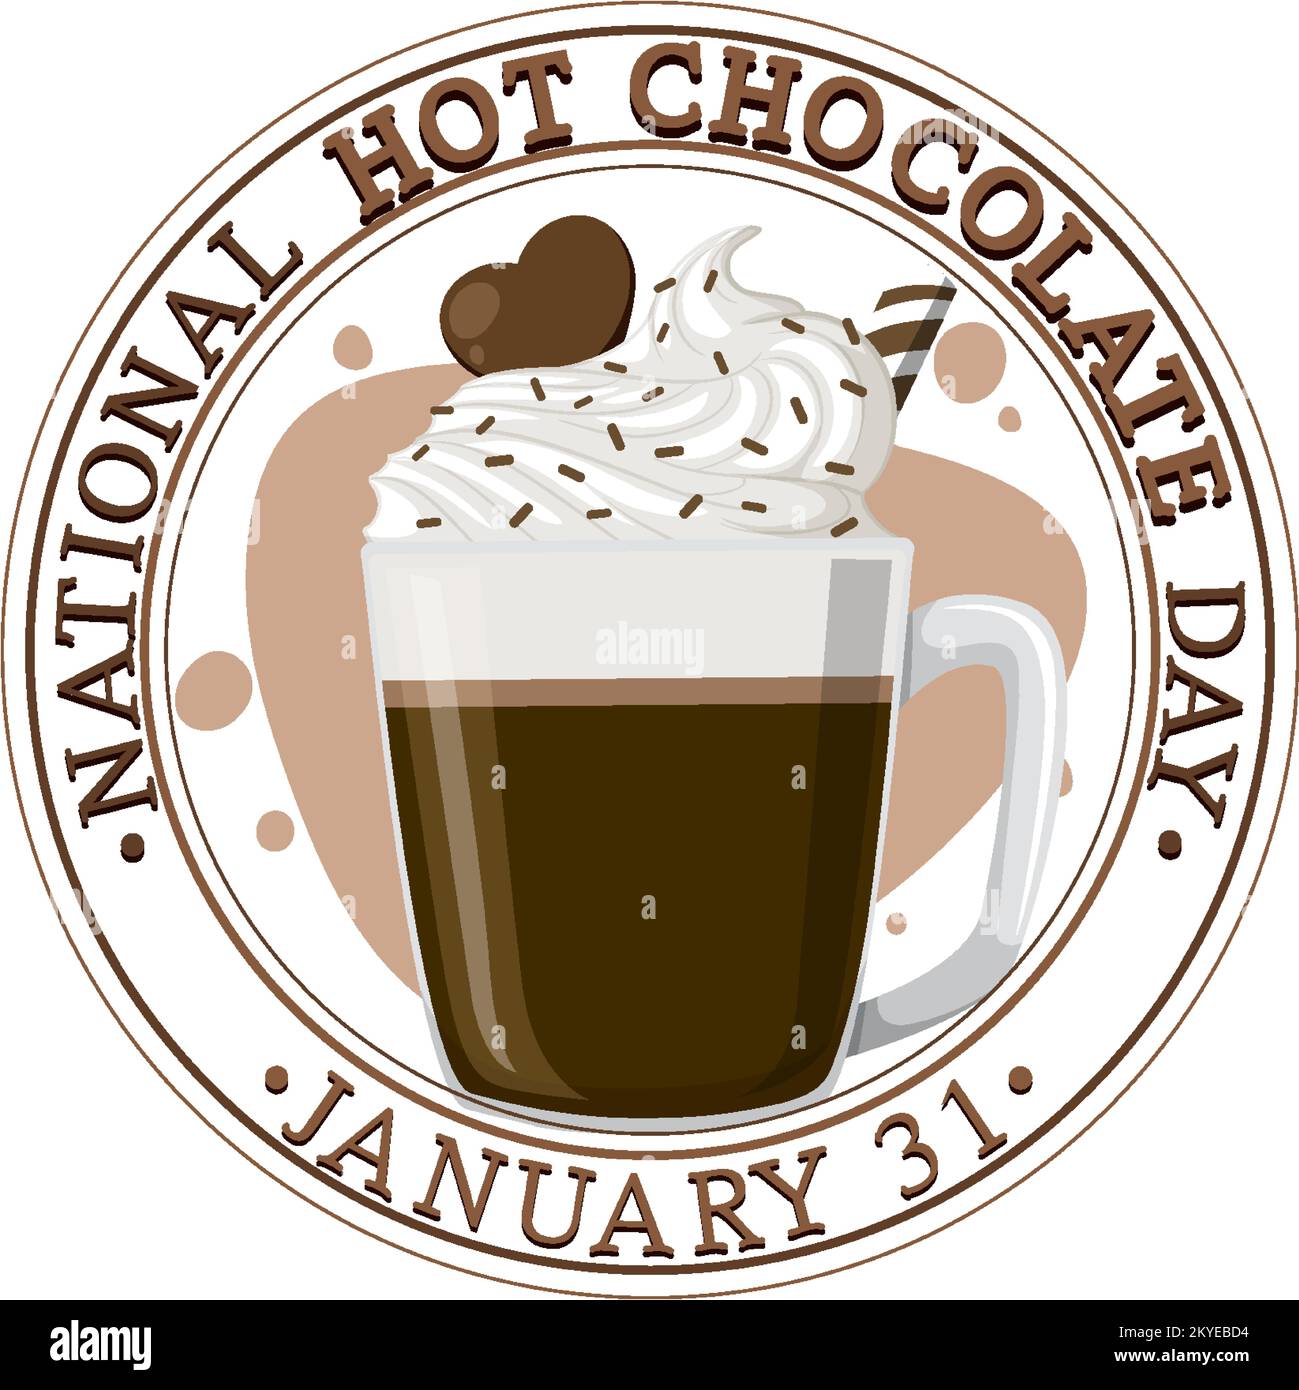 National Hot Chocolate Day Banner Design illustration Stock Vector